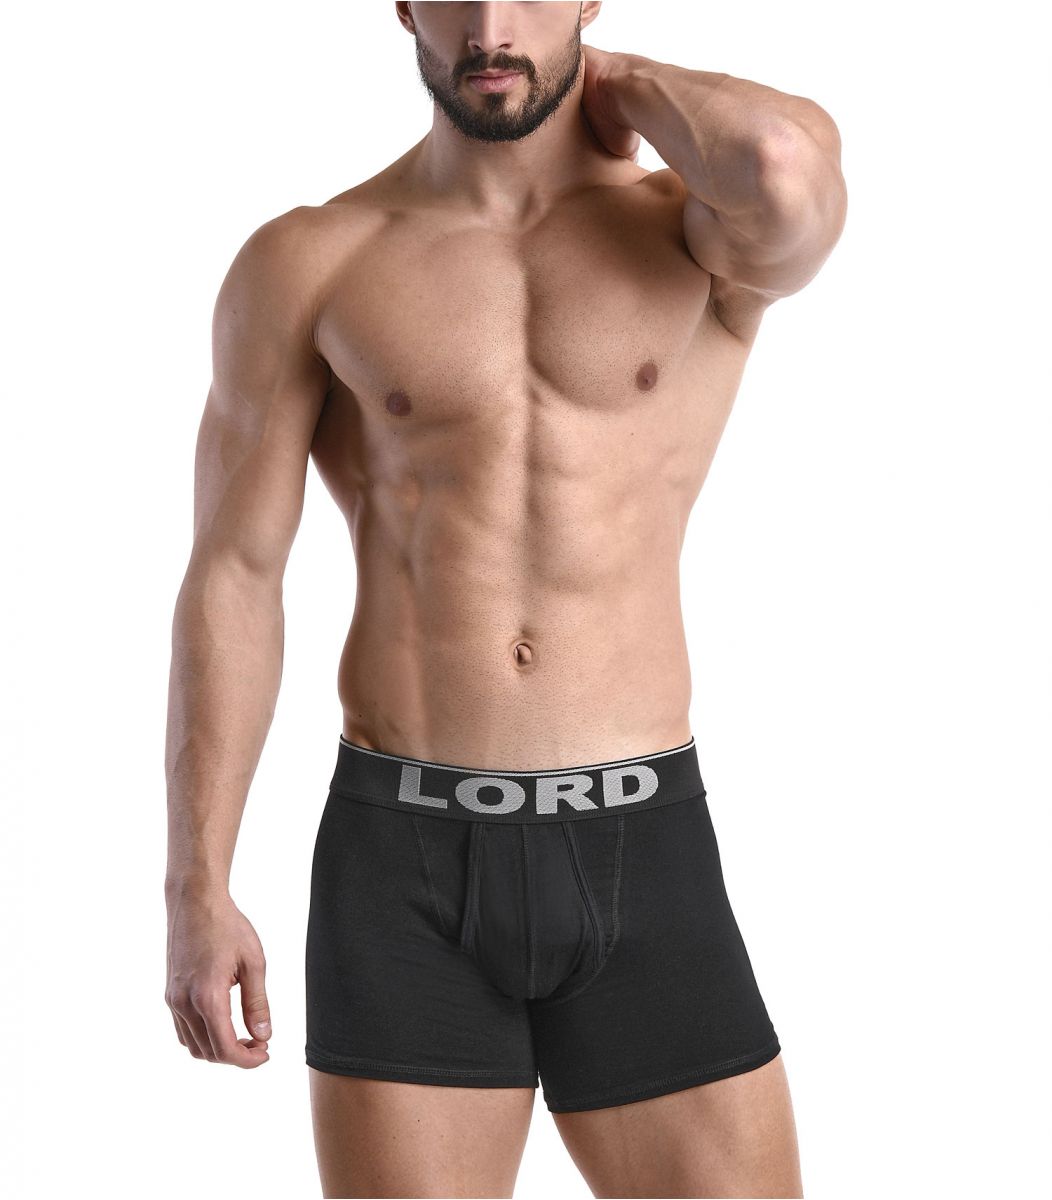 Lord Men boxer, opening Lord - 2